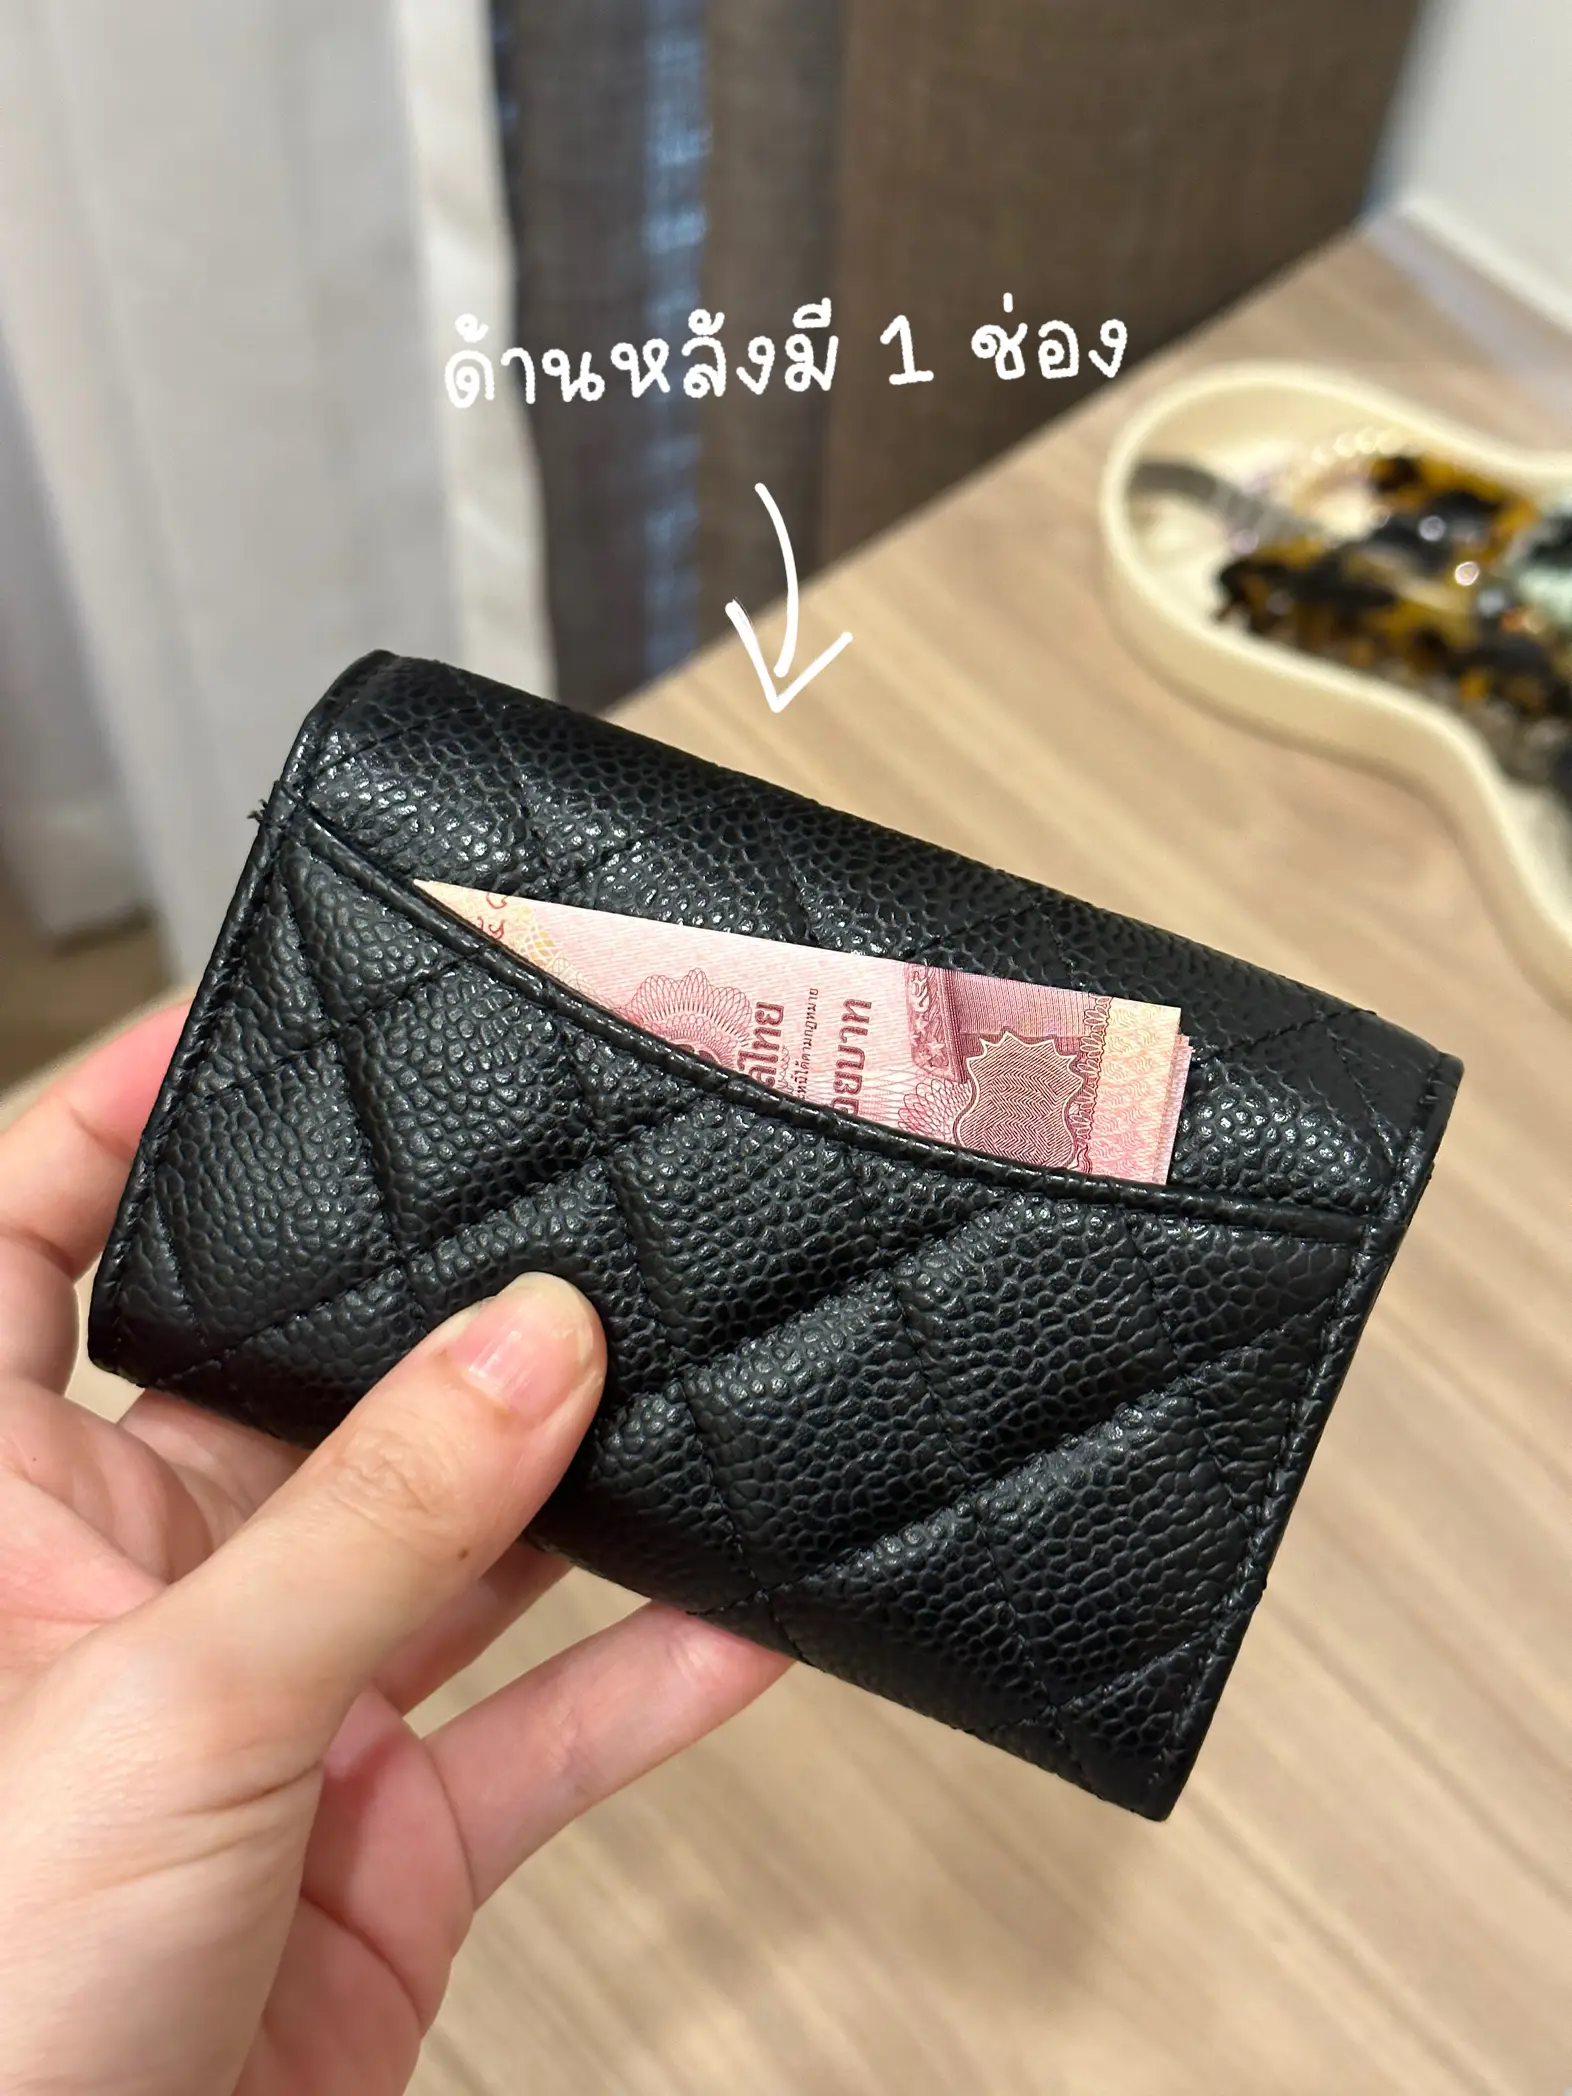 Chanel Card Holder review that should be pounded✨, Gallery posted by  nutchabeam